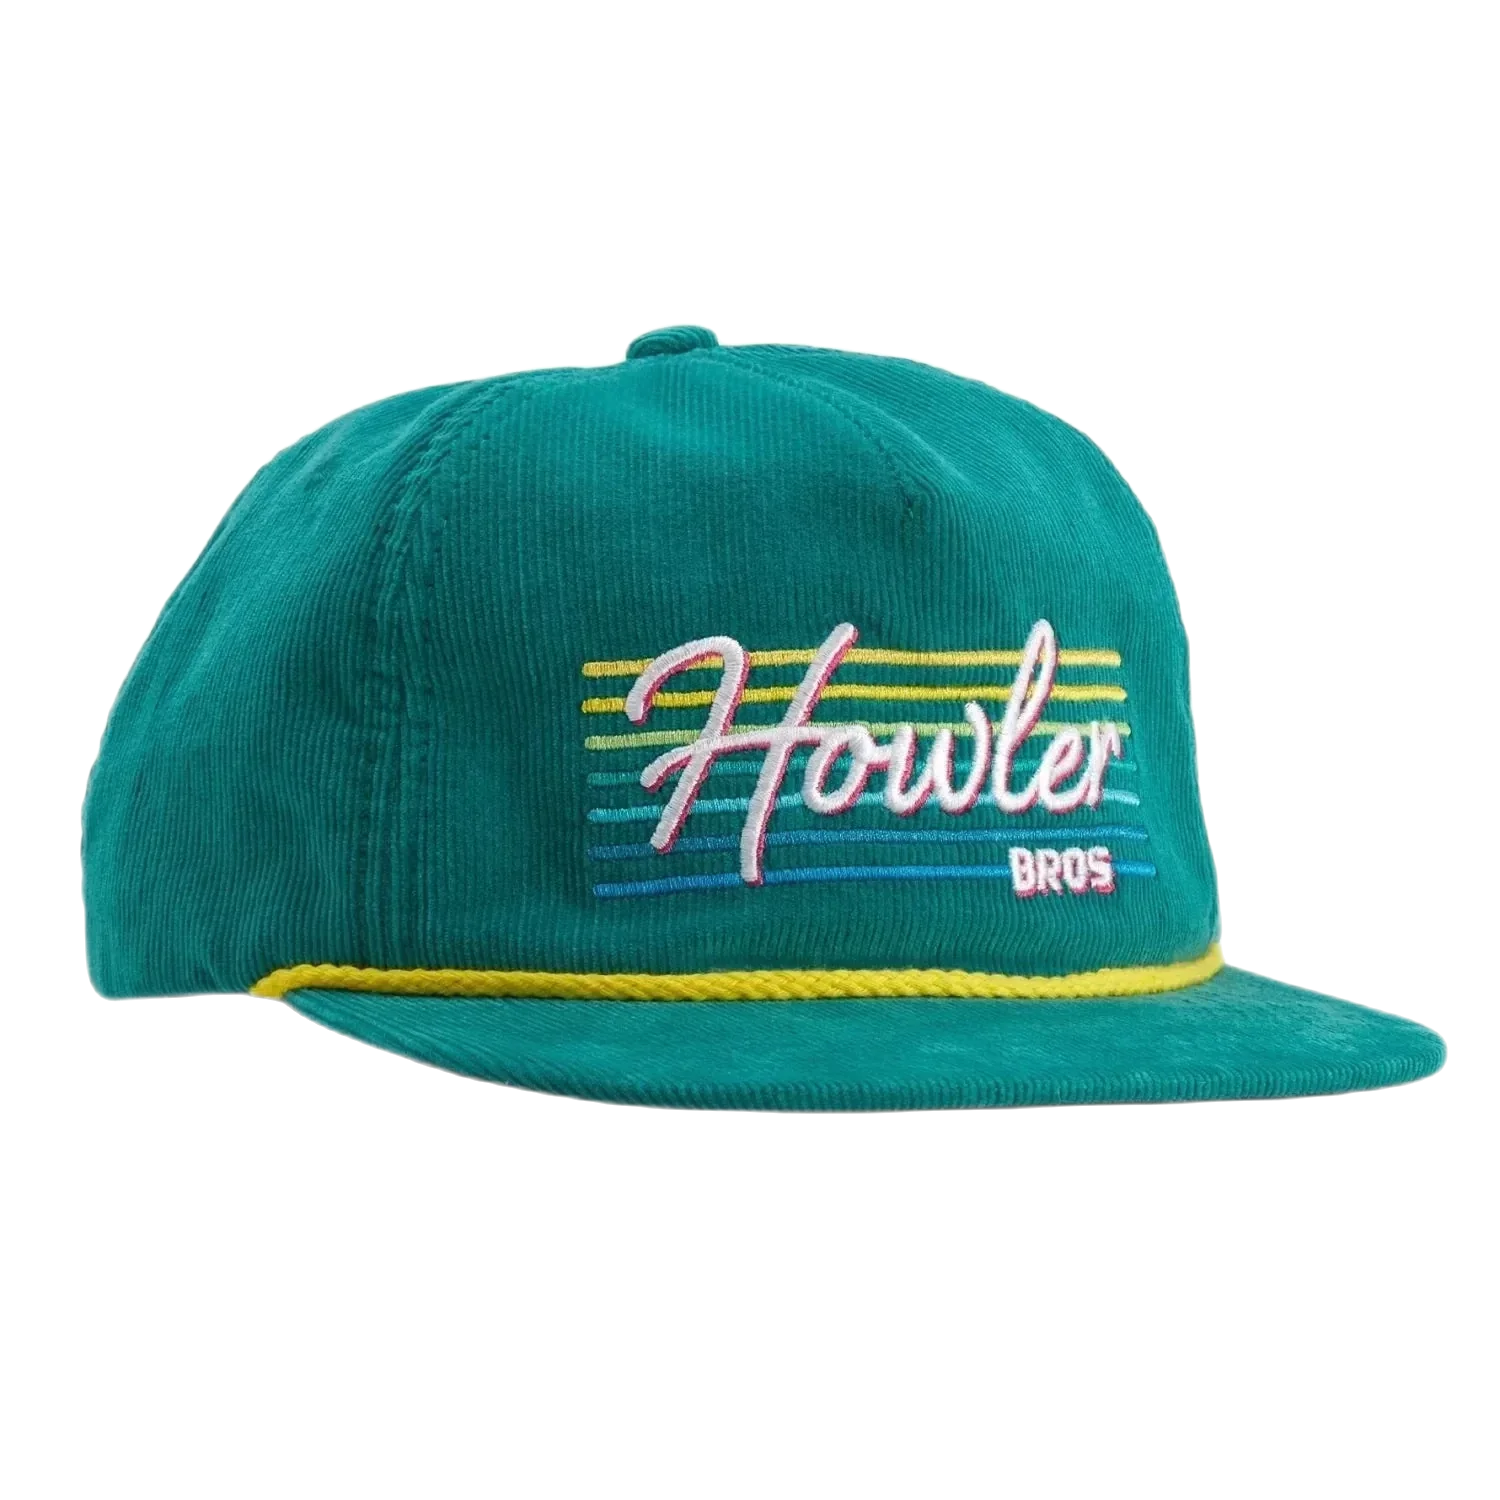 Howler Bros 20. HATS_GLOVES_SCARVES - HATS Unstructured Snapback Hats HOWLER BEACH CLUB | TEAL CORDUROY OS